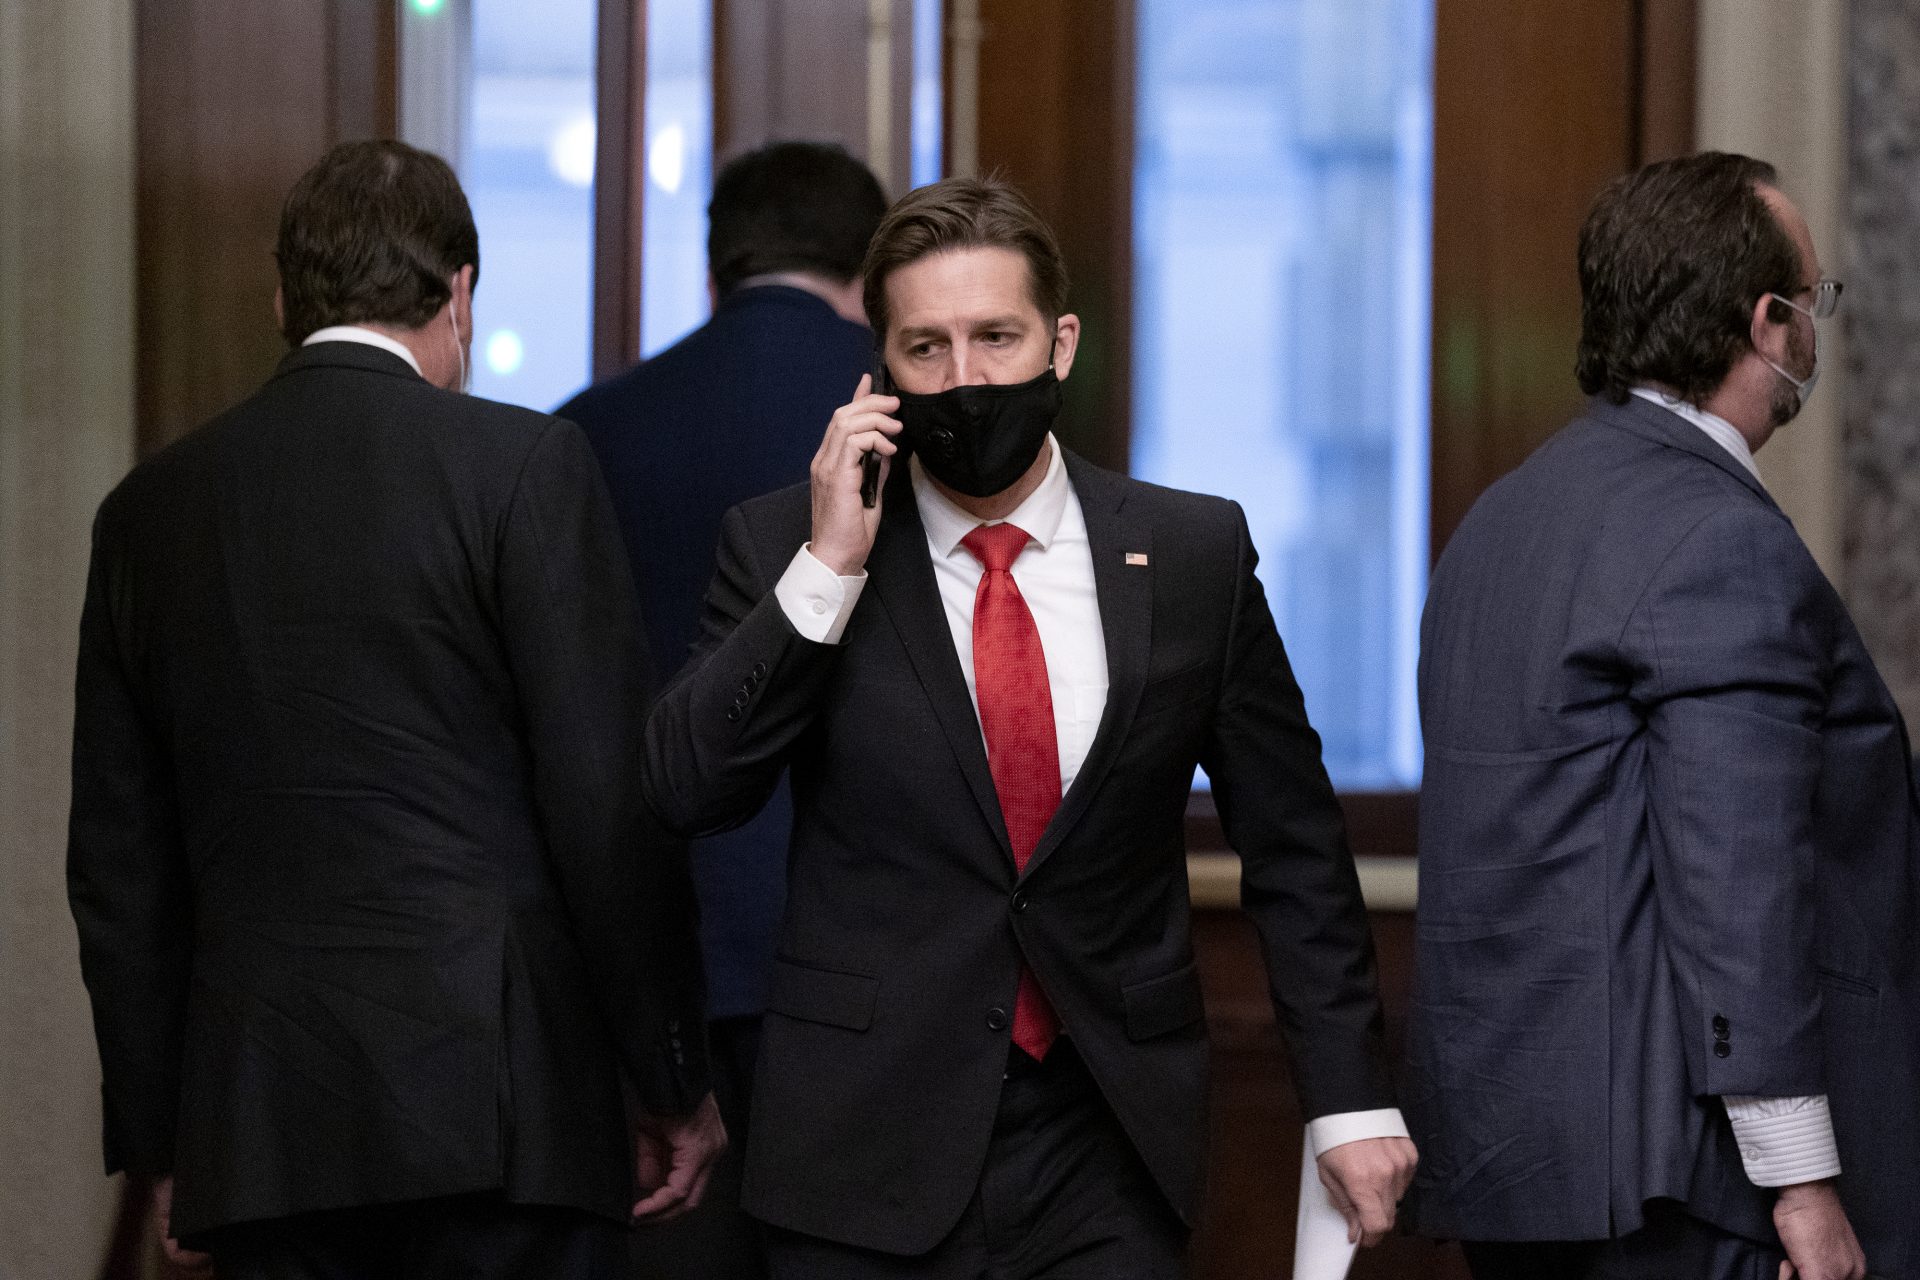 Sen. Ben Sasse, R-Neb., center, walks on Capitol Hill on the fifth day of the second impeachment trial of former President Donald Trump, Saturday, Feb. 13, 2021 at the Capitol in Washington.